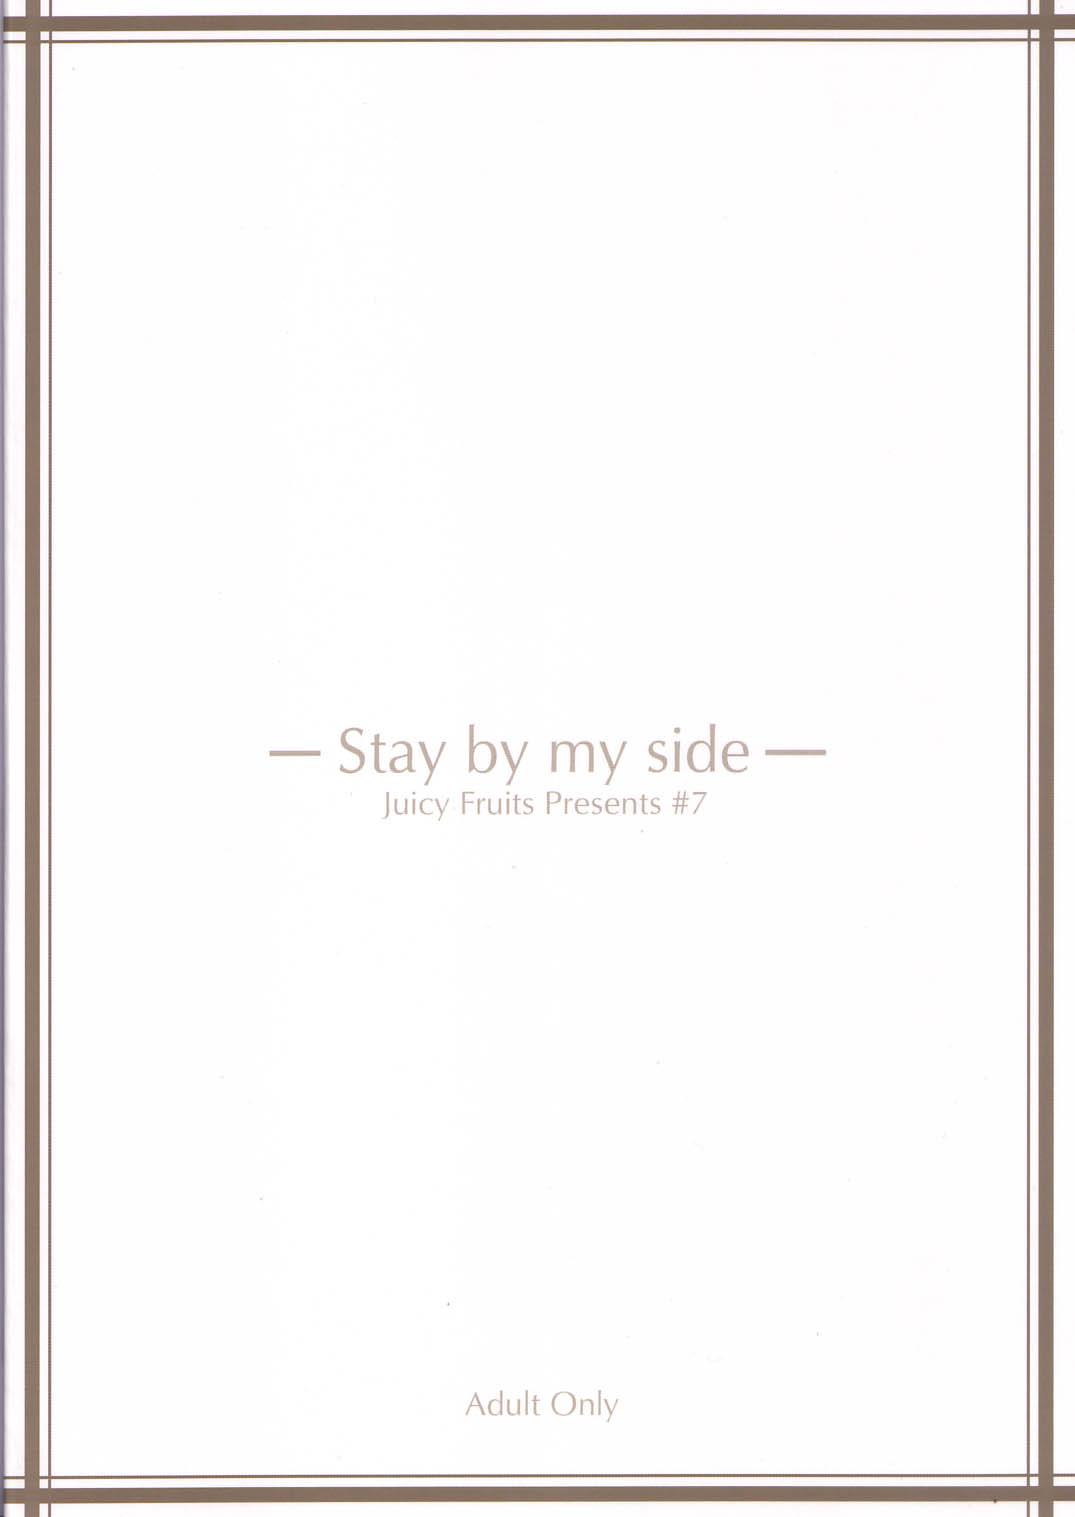 Stay by my side 27